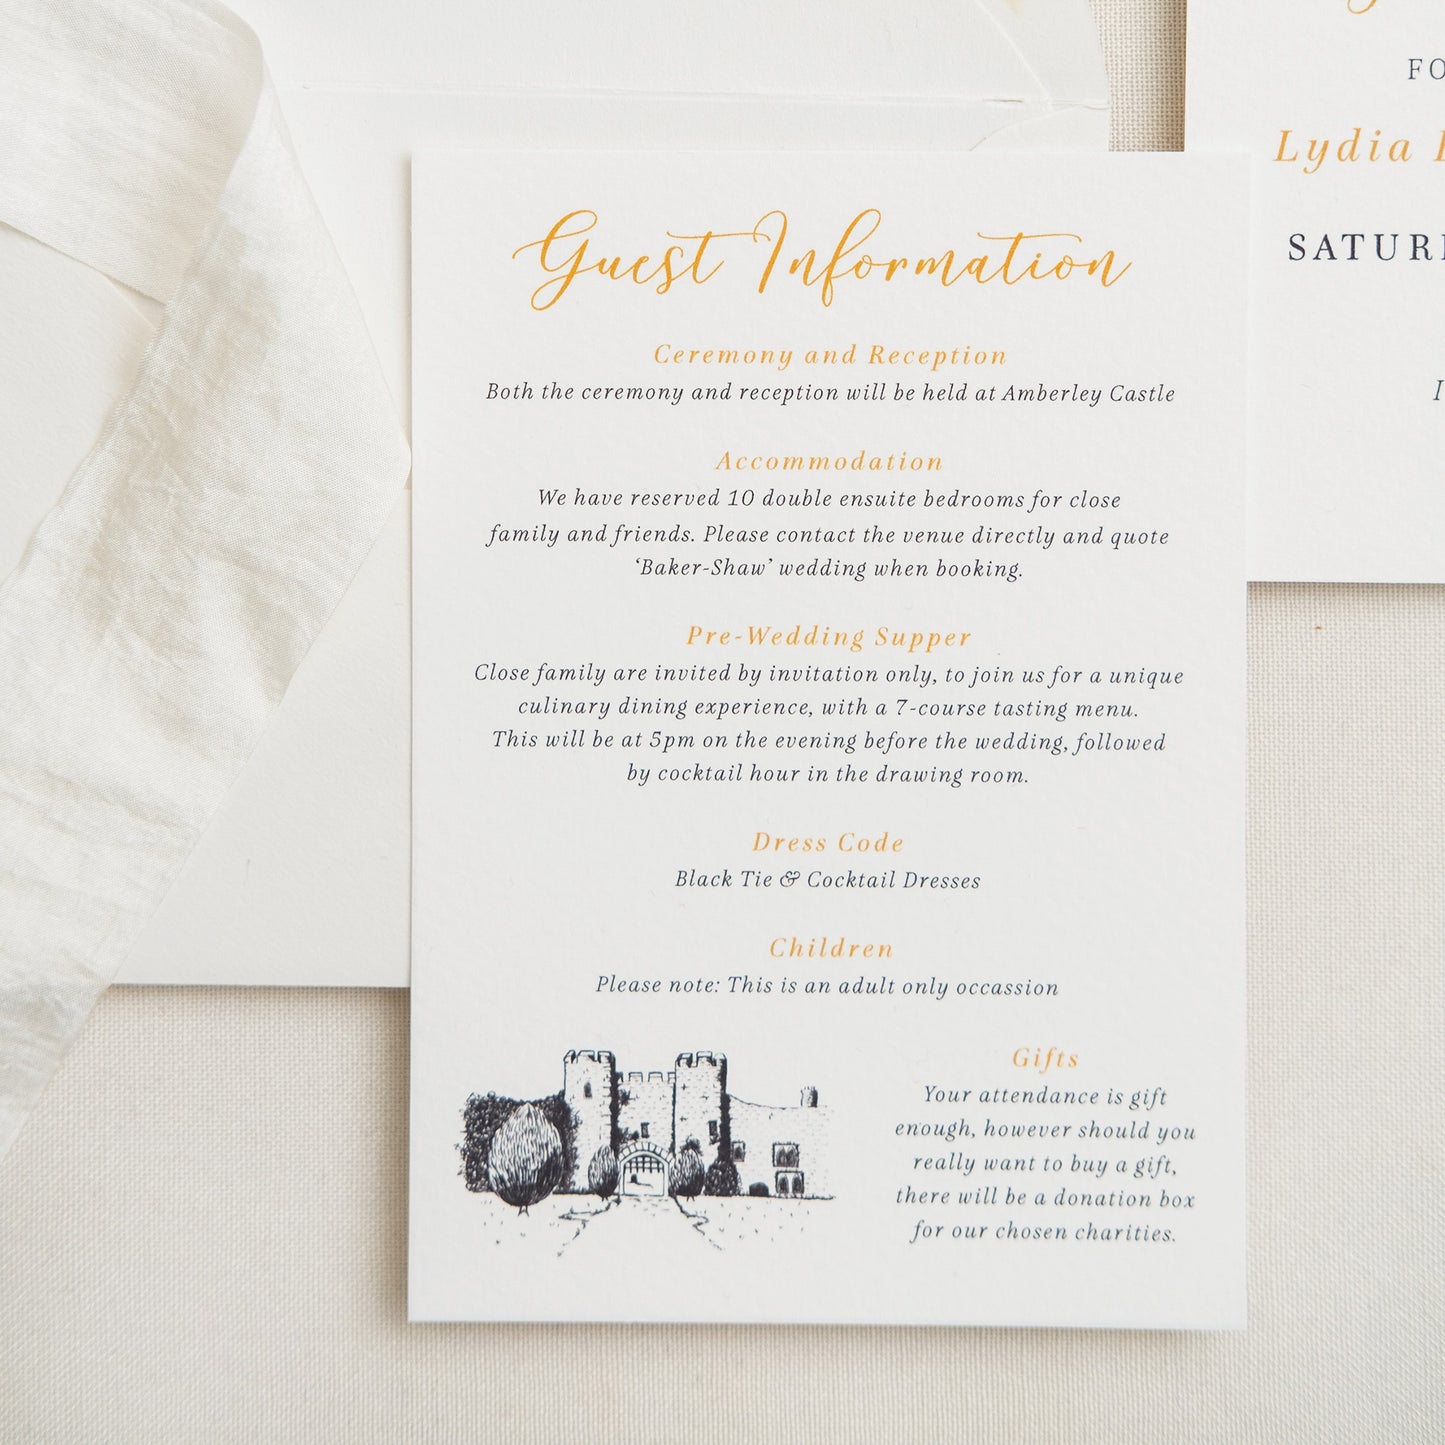 Guest Information Card With Venue Illustration